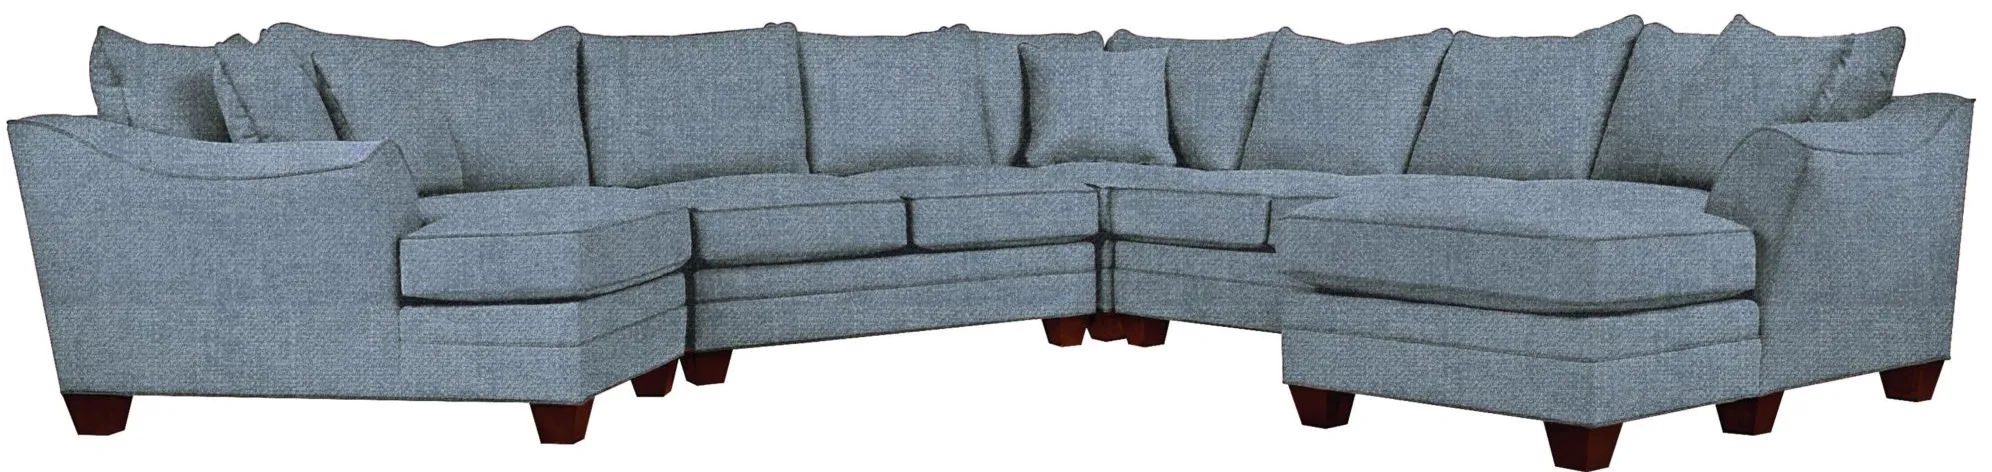 Foresthill 5-pc. Right Hand Facing Sectional Sofa in Elliot French Blue by H.M. Richards